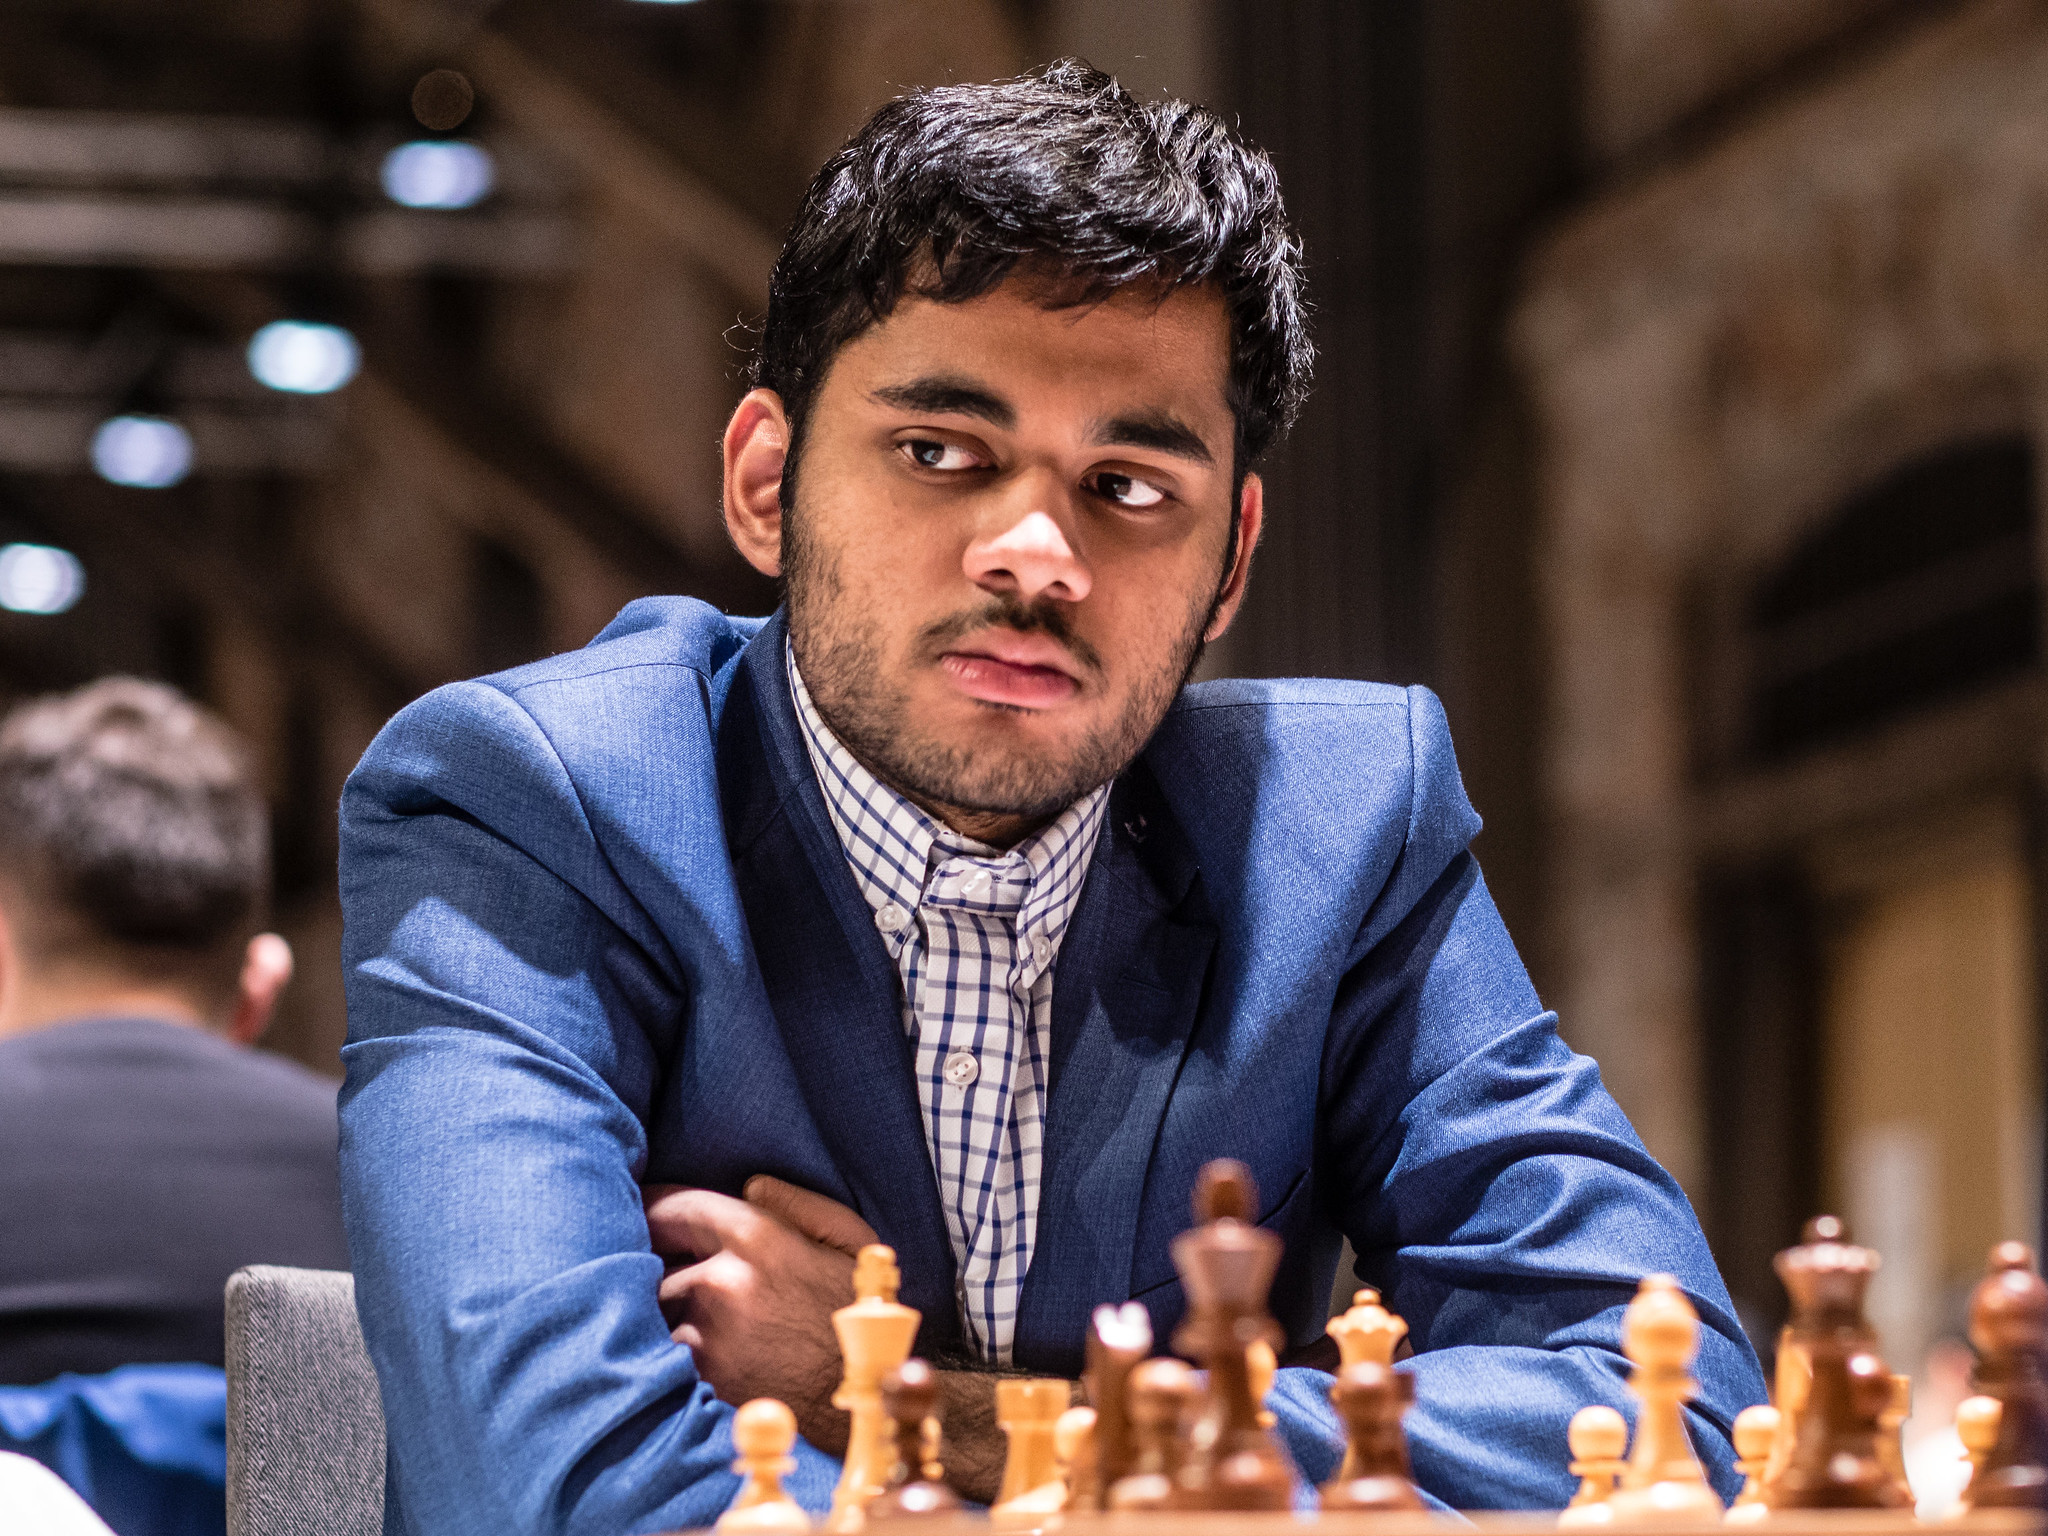 International Chess Federation on X: The action at the FIDE